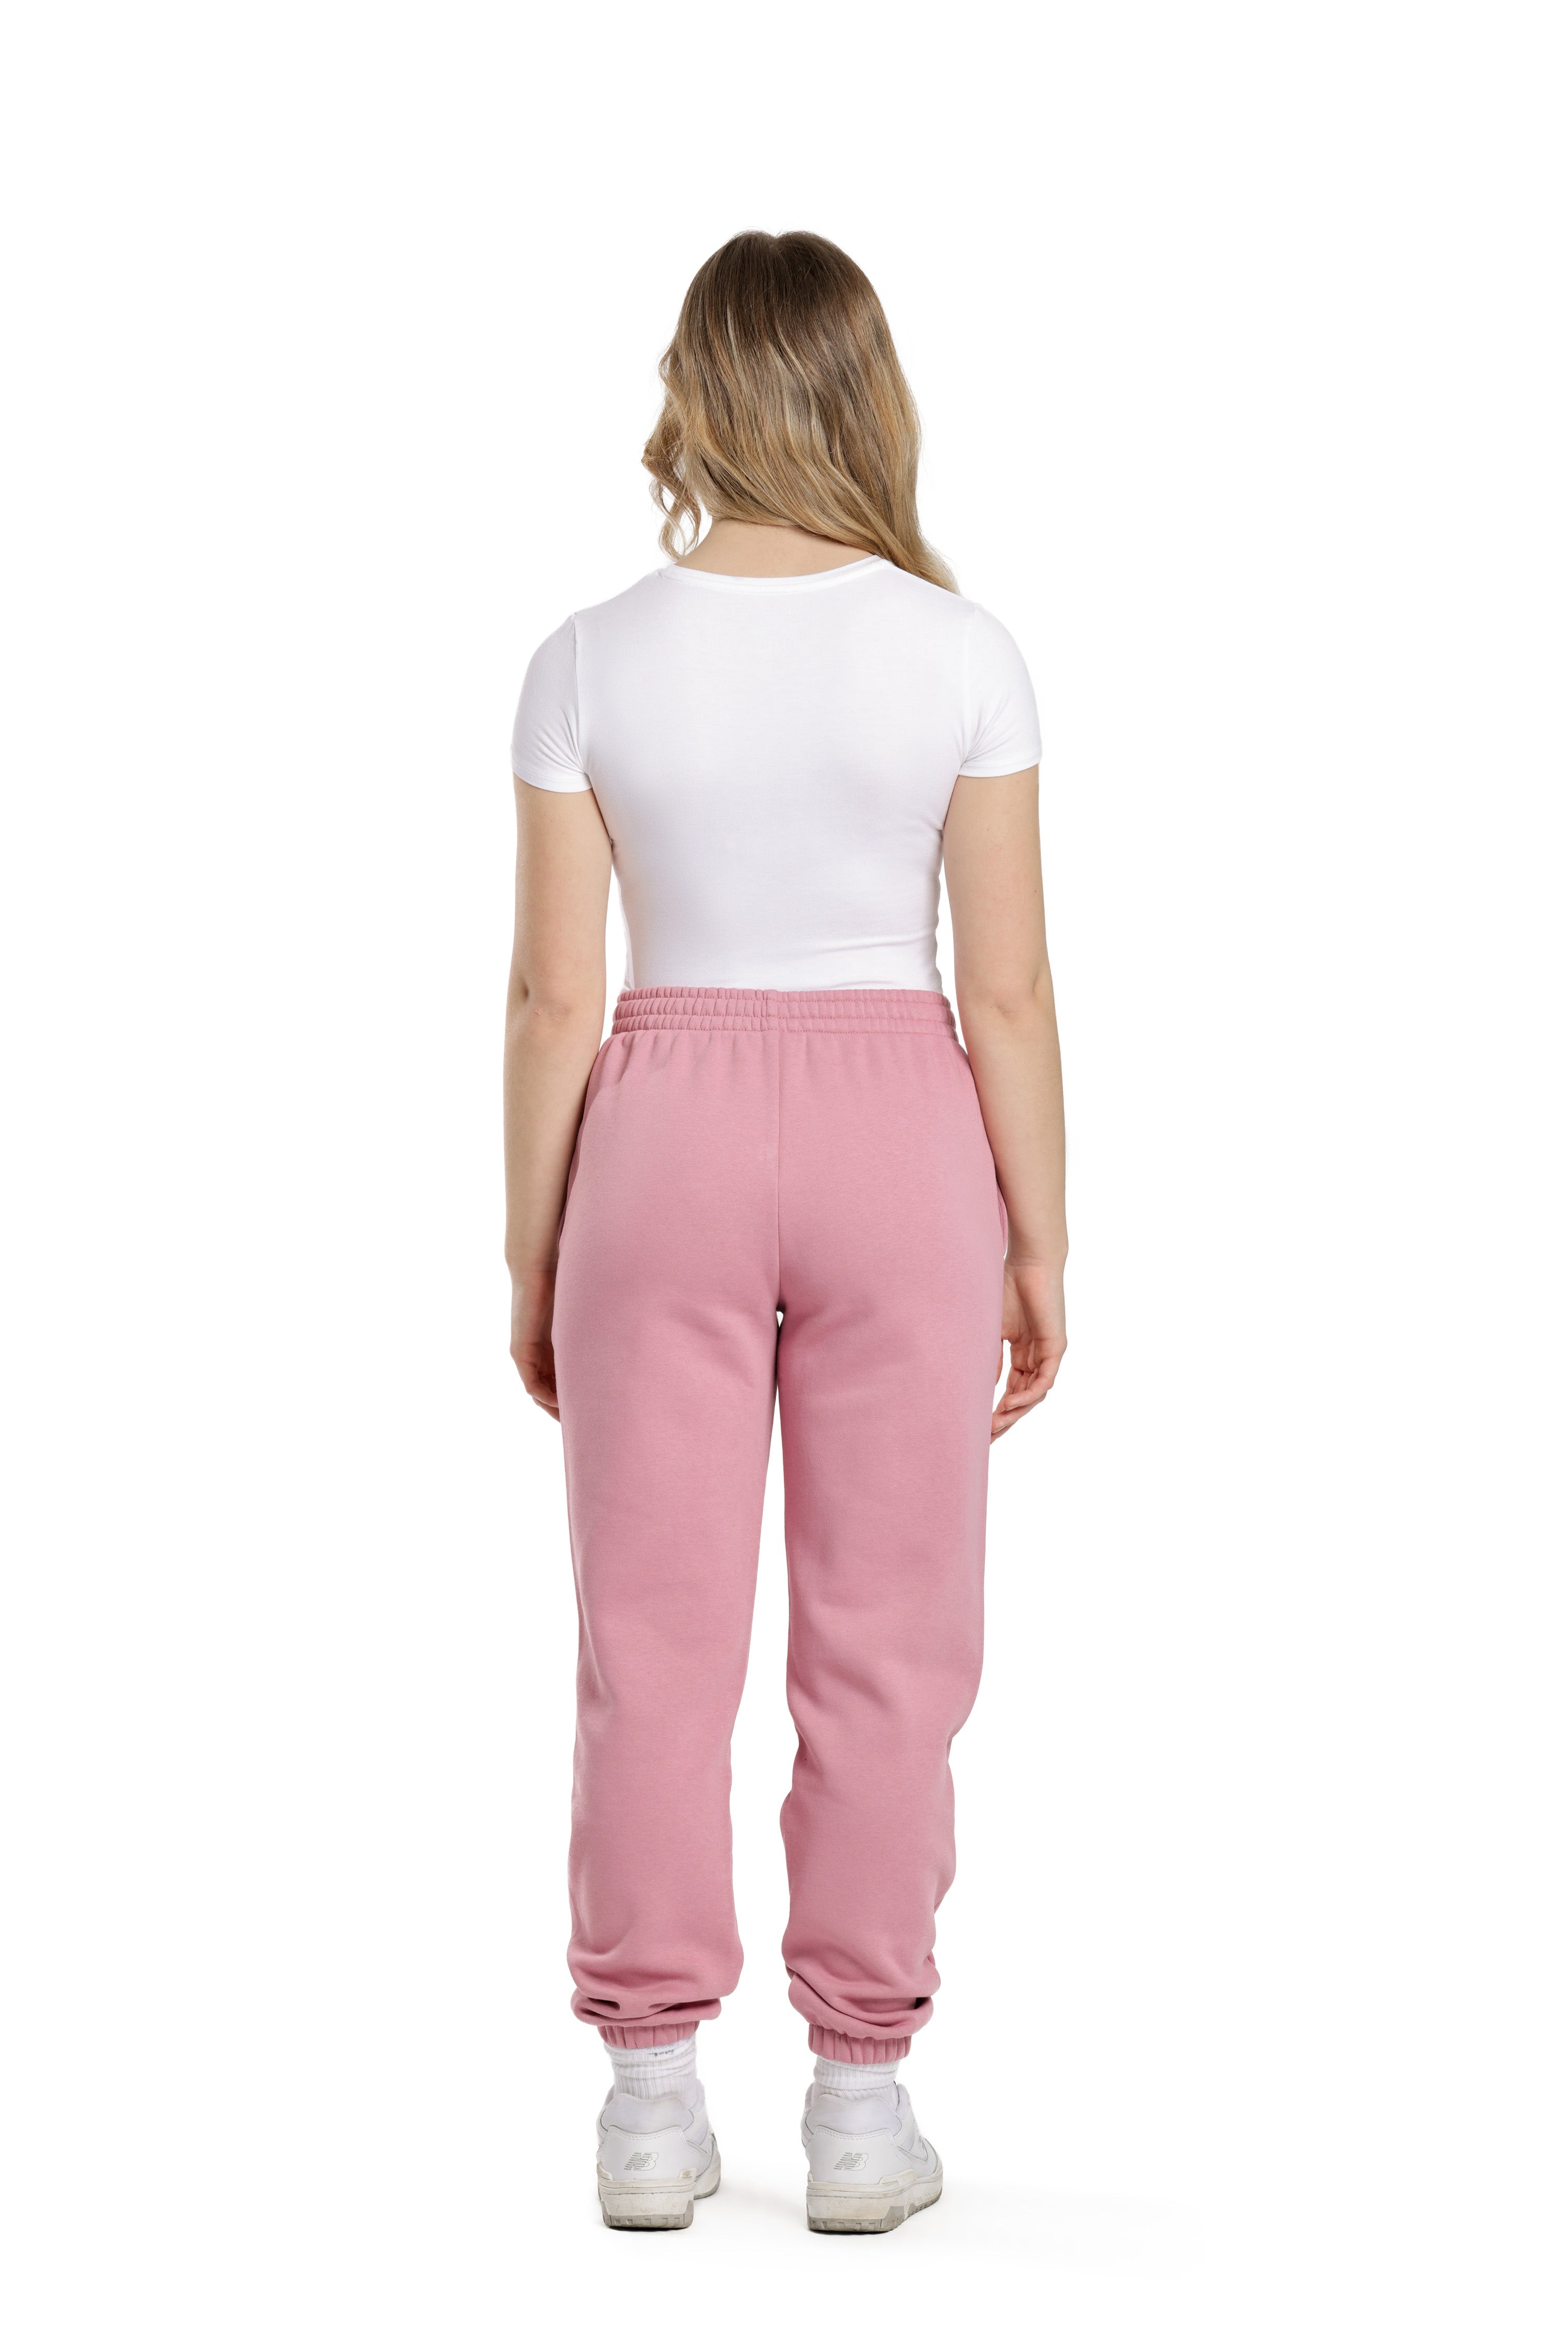 Cheeky relaxed jogger in orchid pink